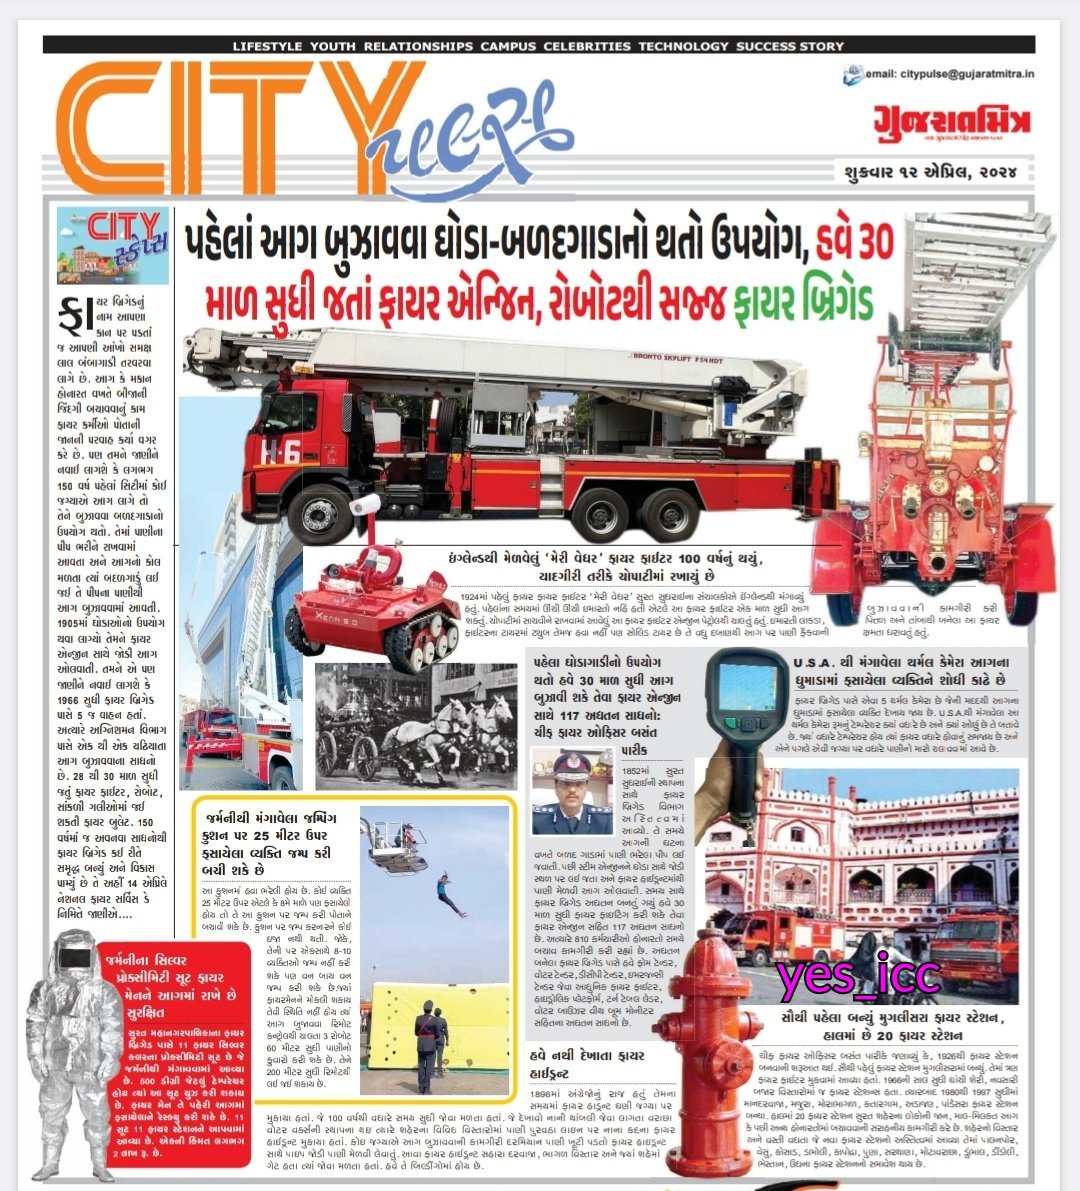 #SMC 🔥 #FireDepartment have most of all the equipment which our #Surat needs ... #GujaratMitra @DaxeshMavani @CommissionerSMC @Bhupendrapbjp ji #yes_icc